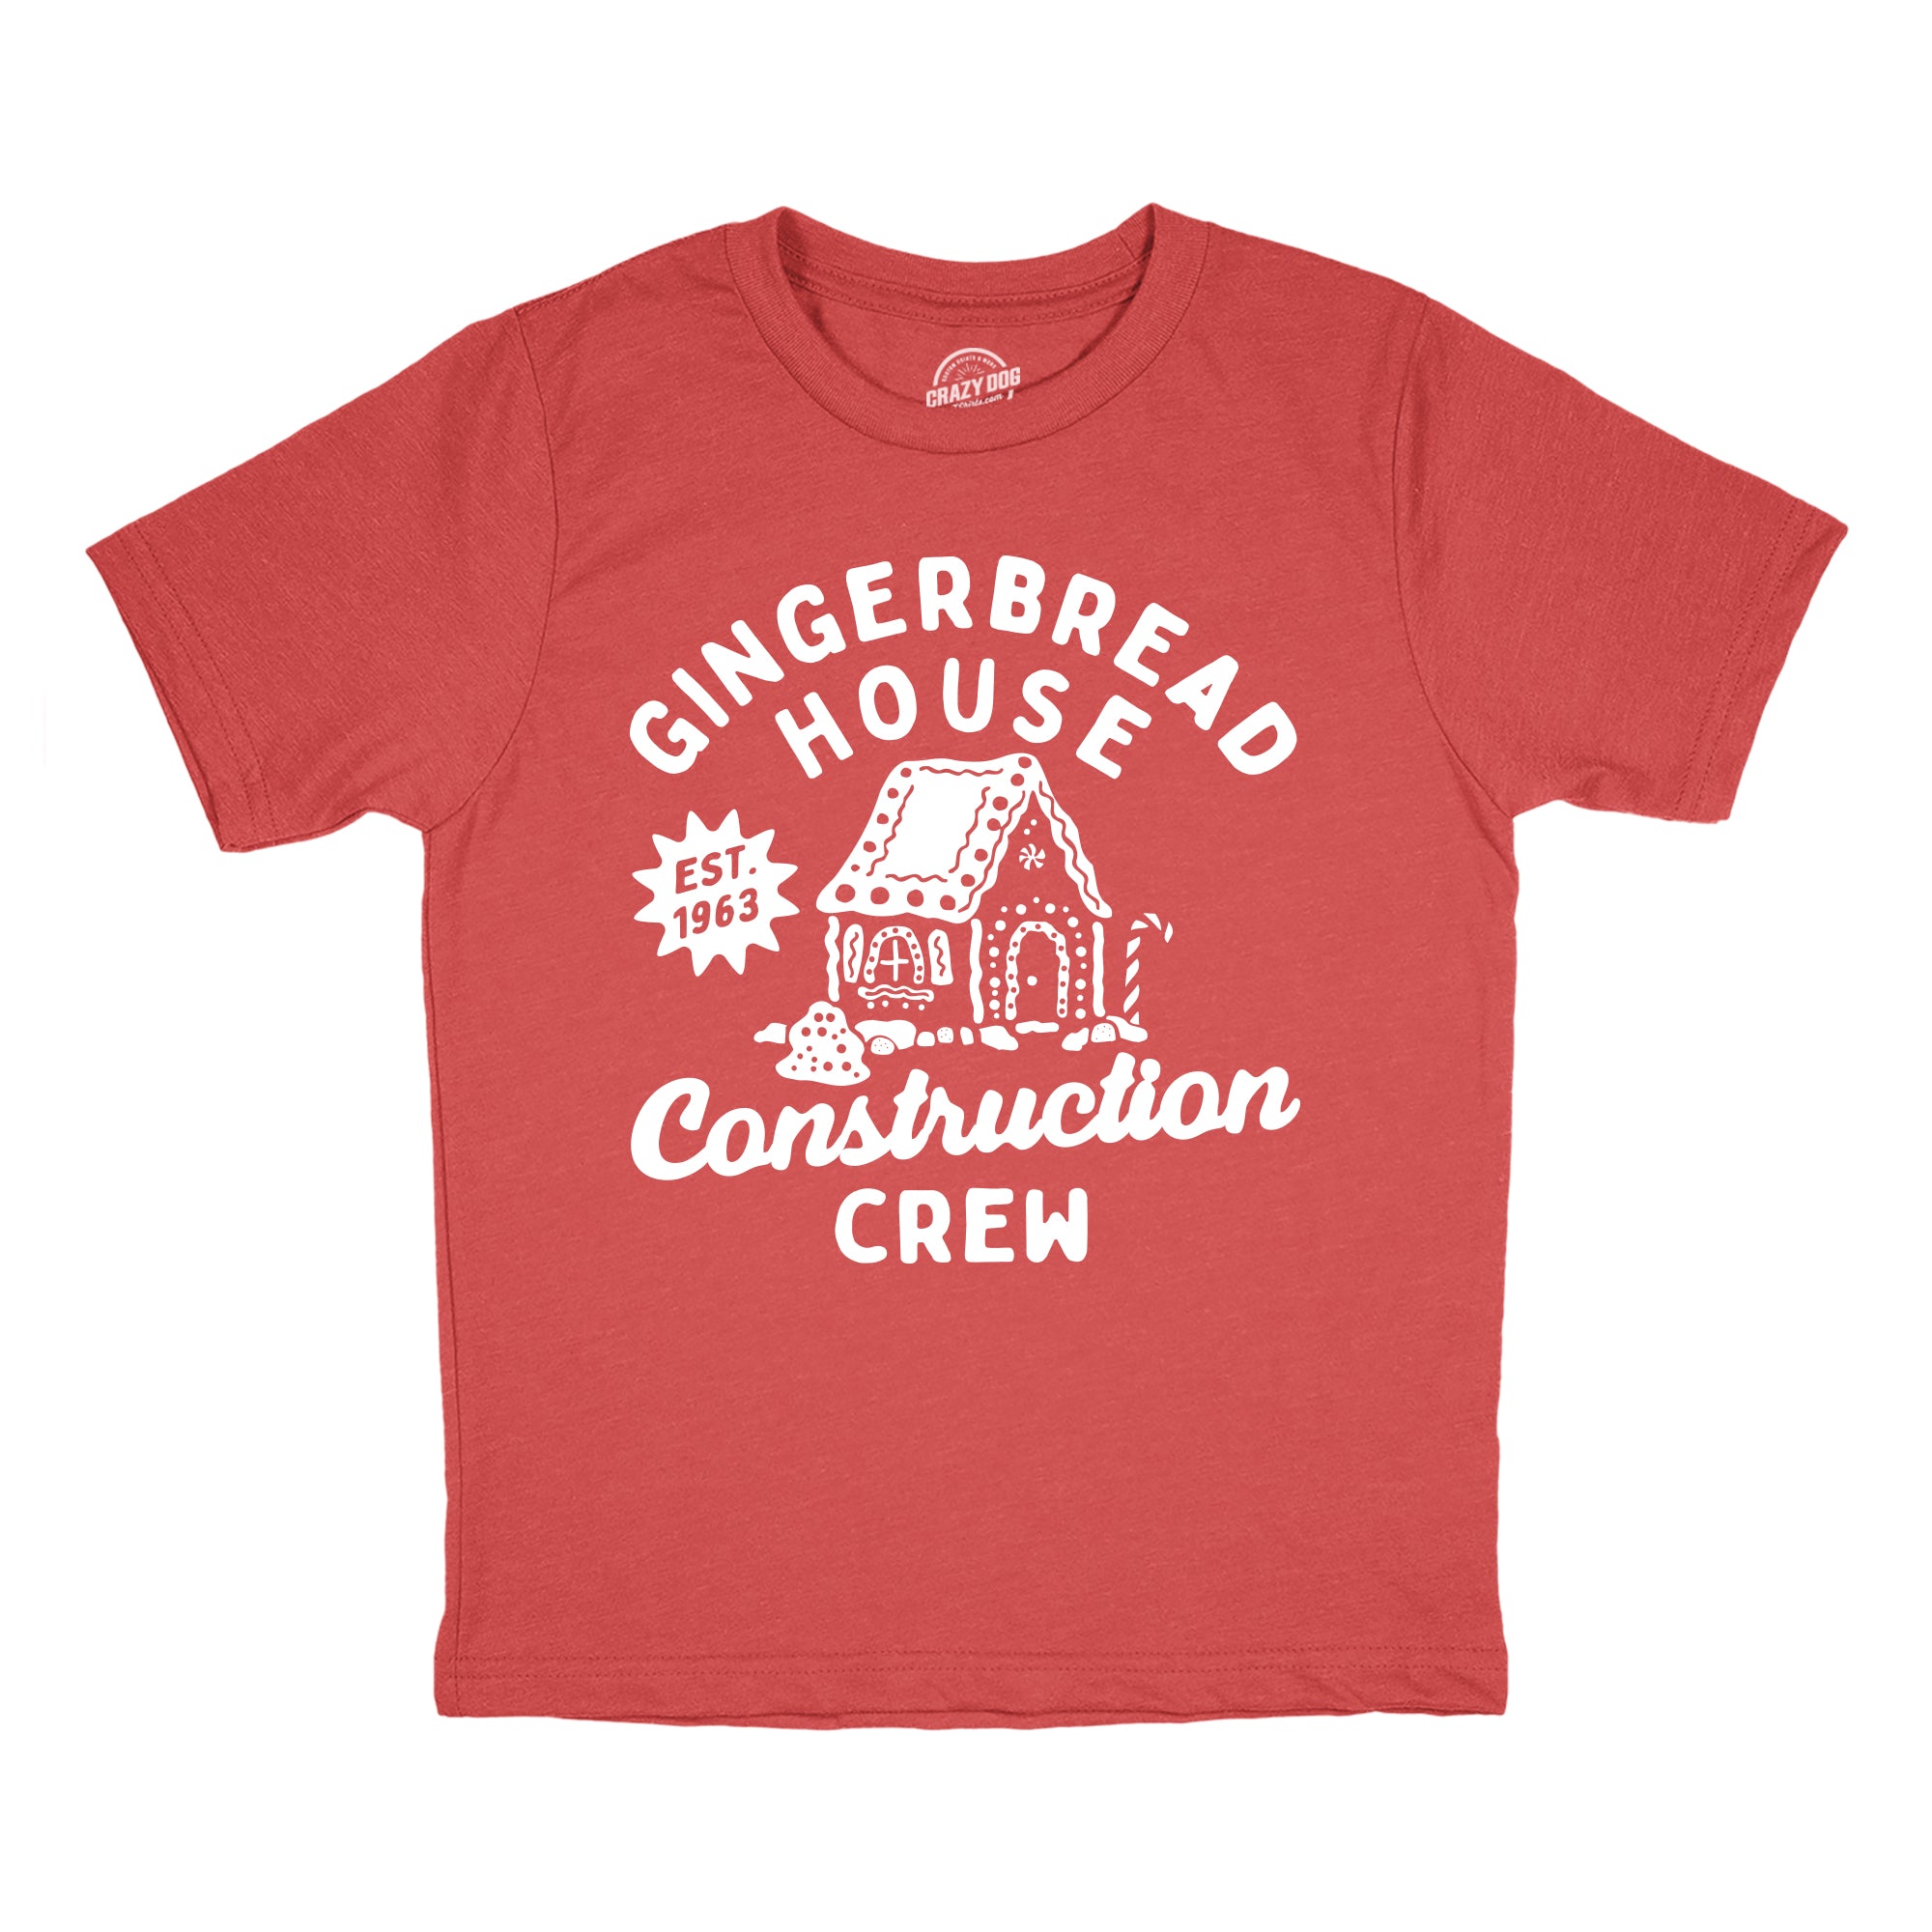 Funny Heather Red - CONSTRUCTION Gingerbread House Construction Crew Youth T Shirt Nerdy Christmas Sarcastic Tee